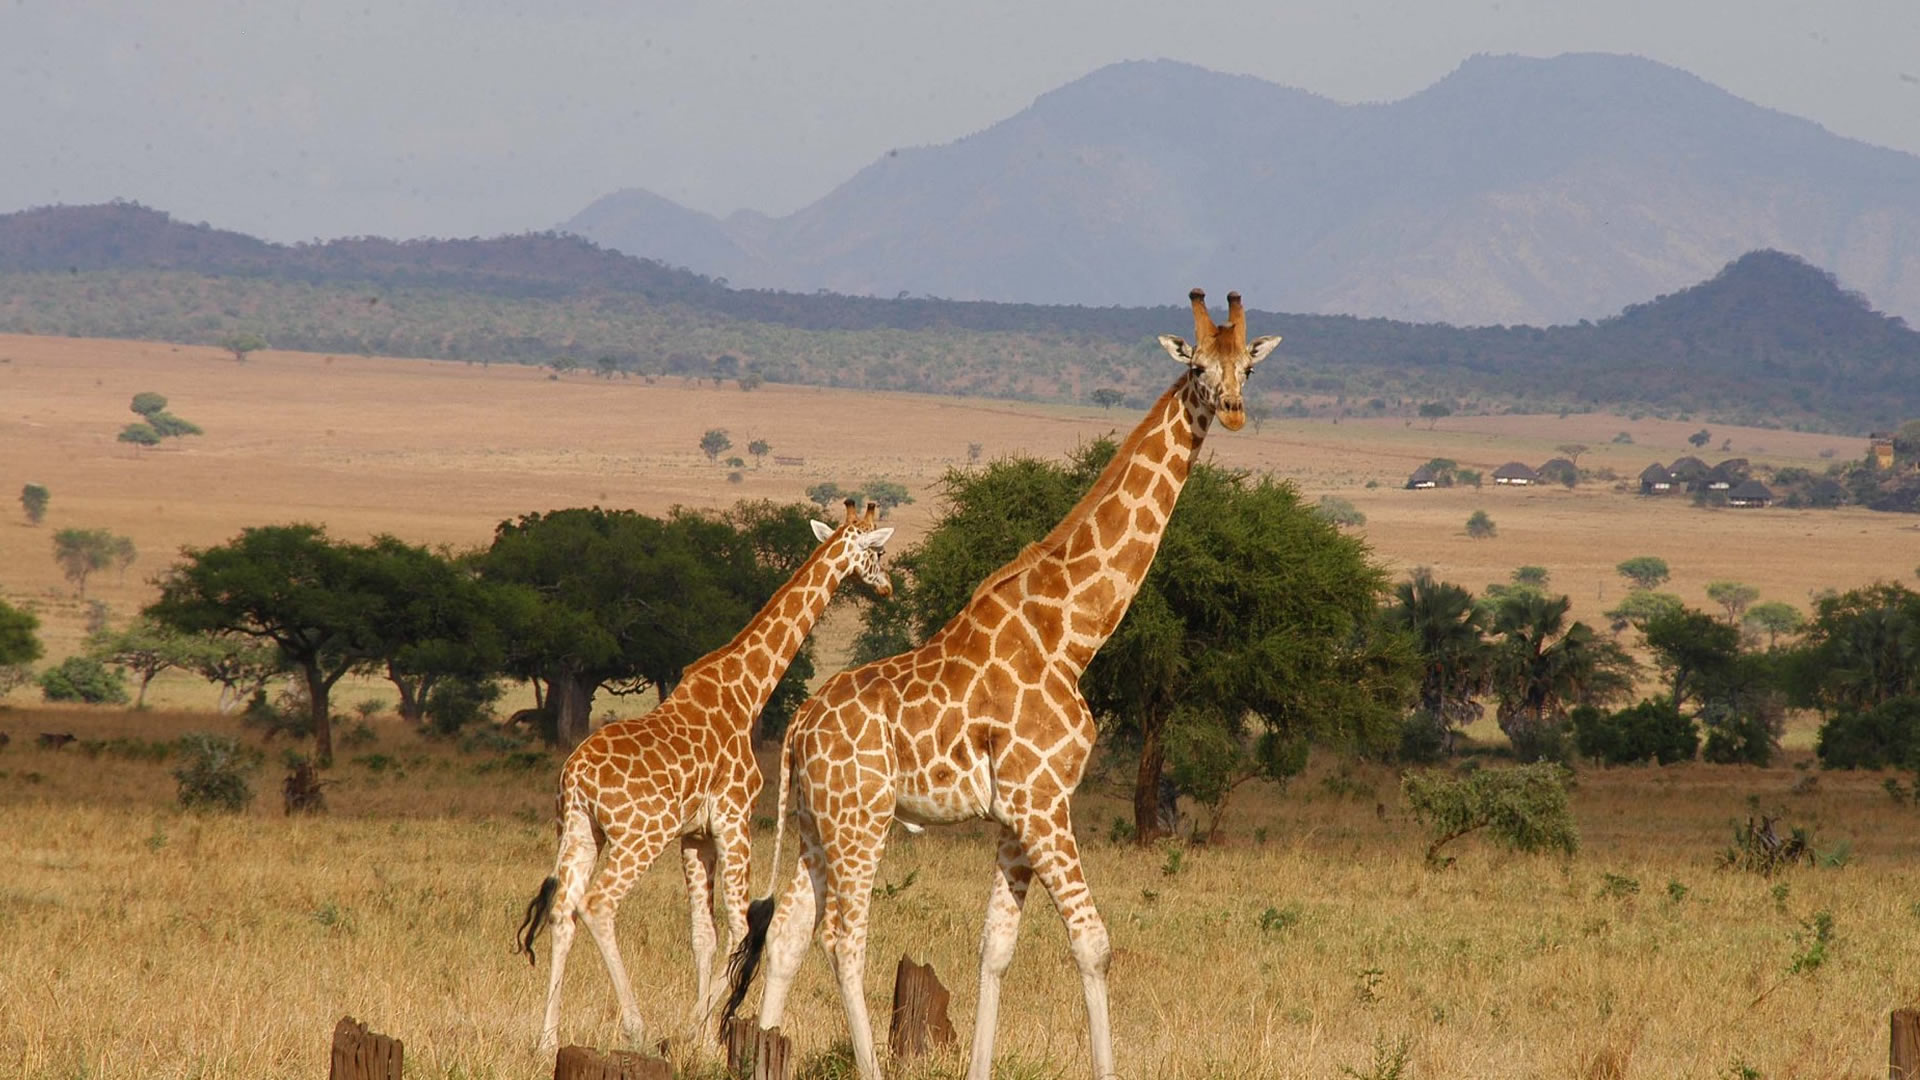 Why Kidepo national park is famous